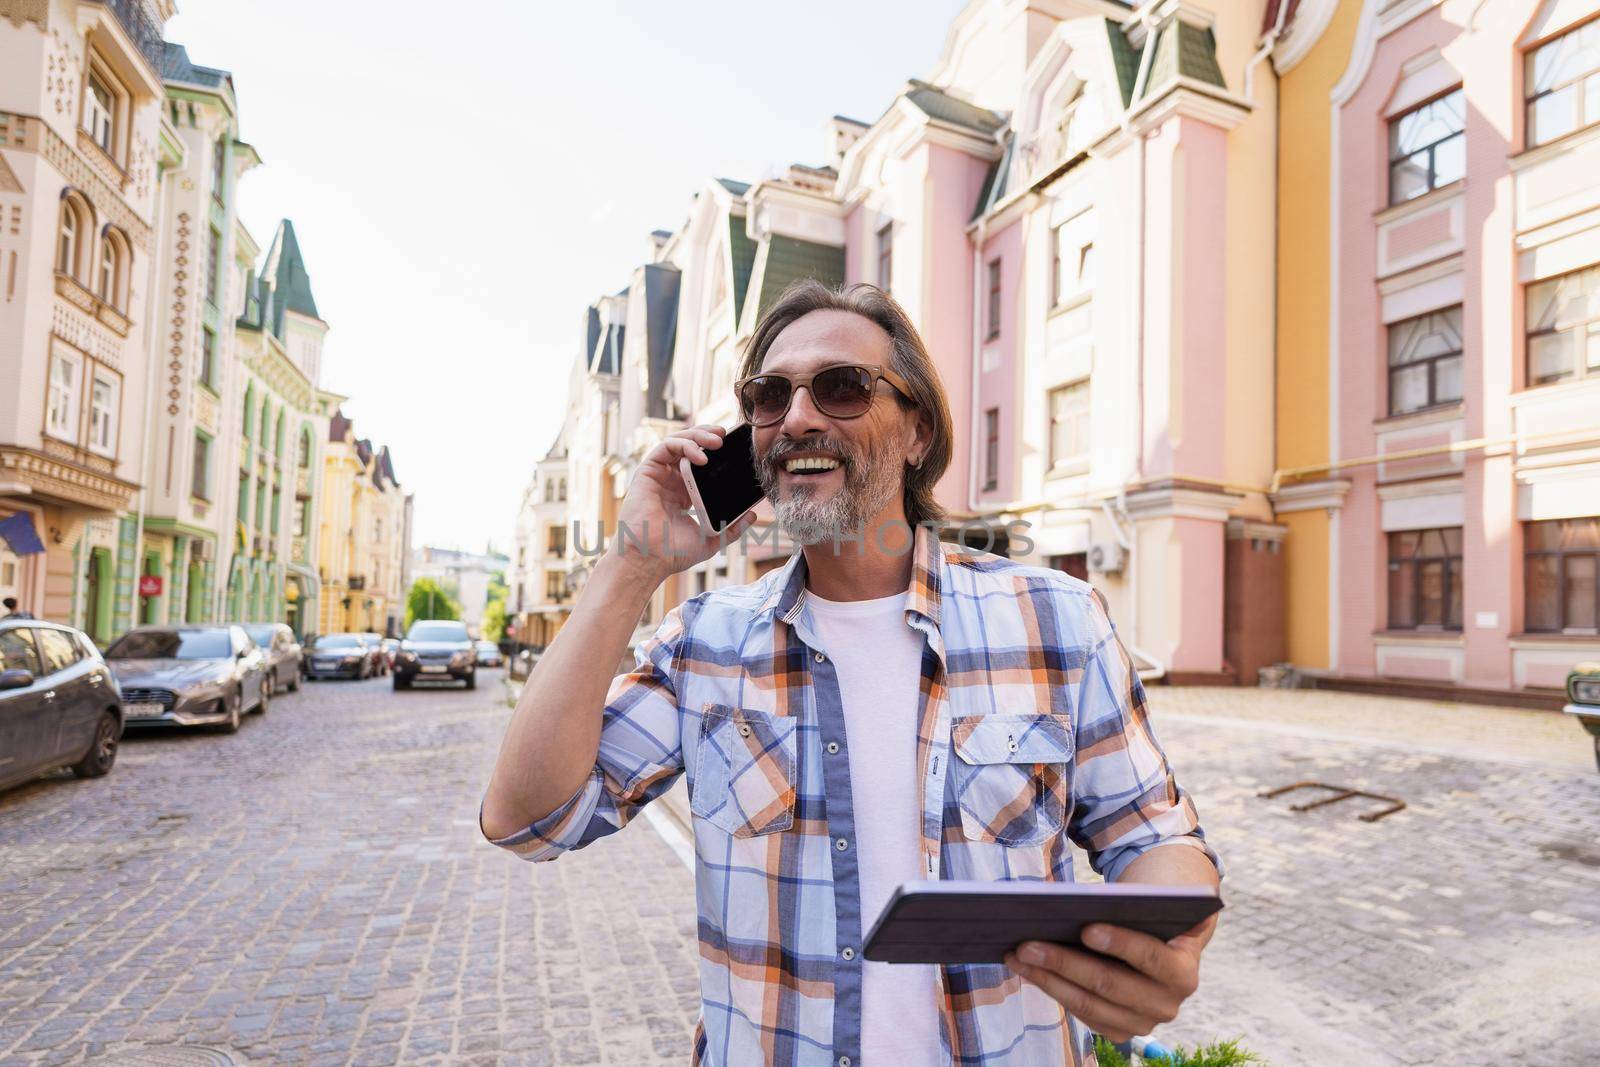 Happy smiling middle aged man with grey beard talking on the phone holding digital tablet in hand standing outdoors in old city background wearing plaid shirt and sunglasses. Freelancer traveling man.